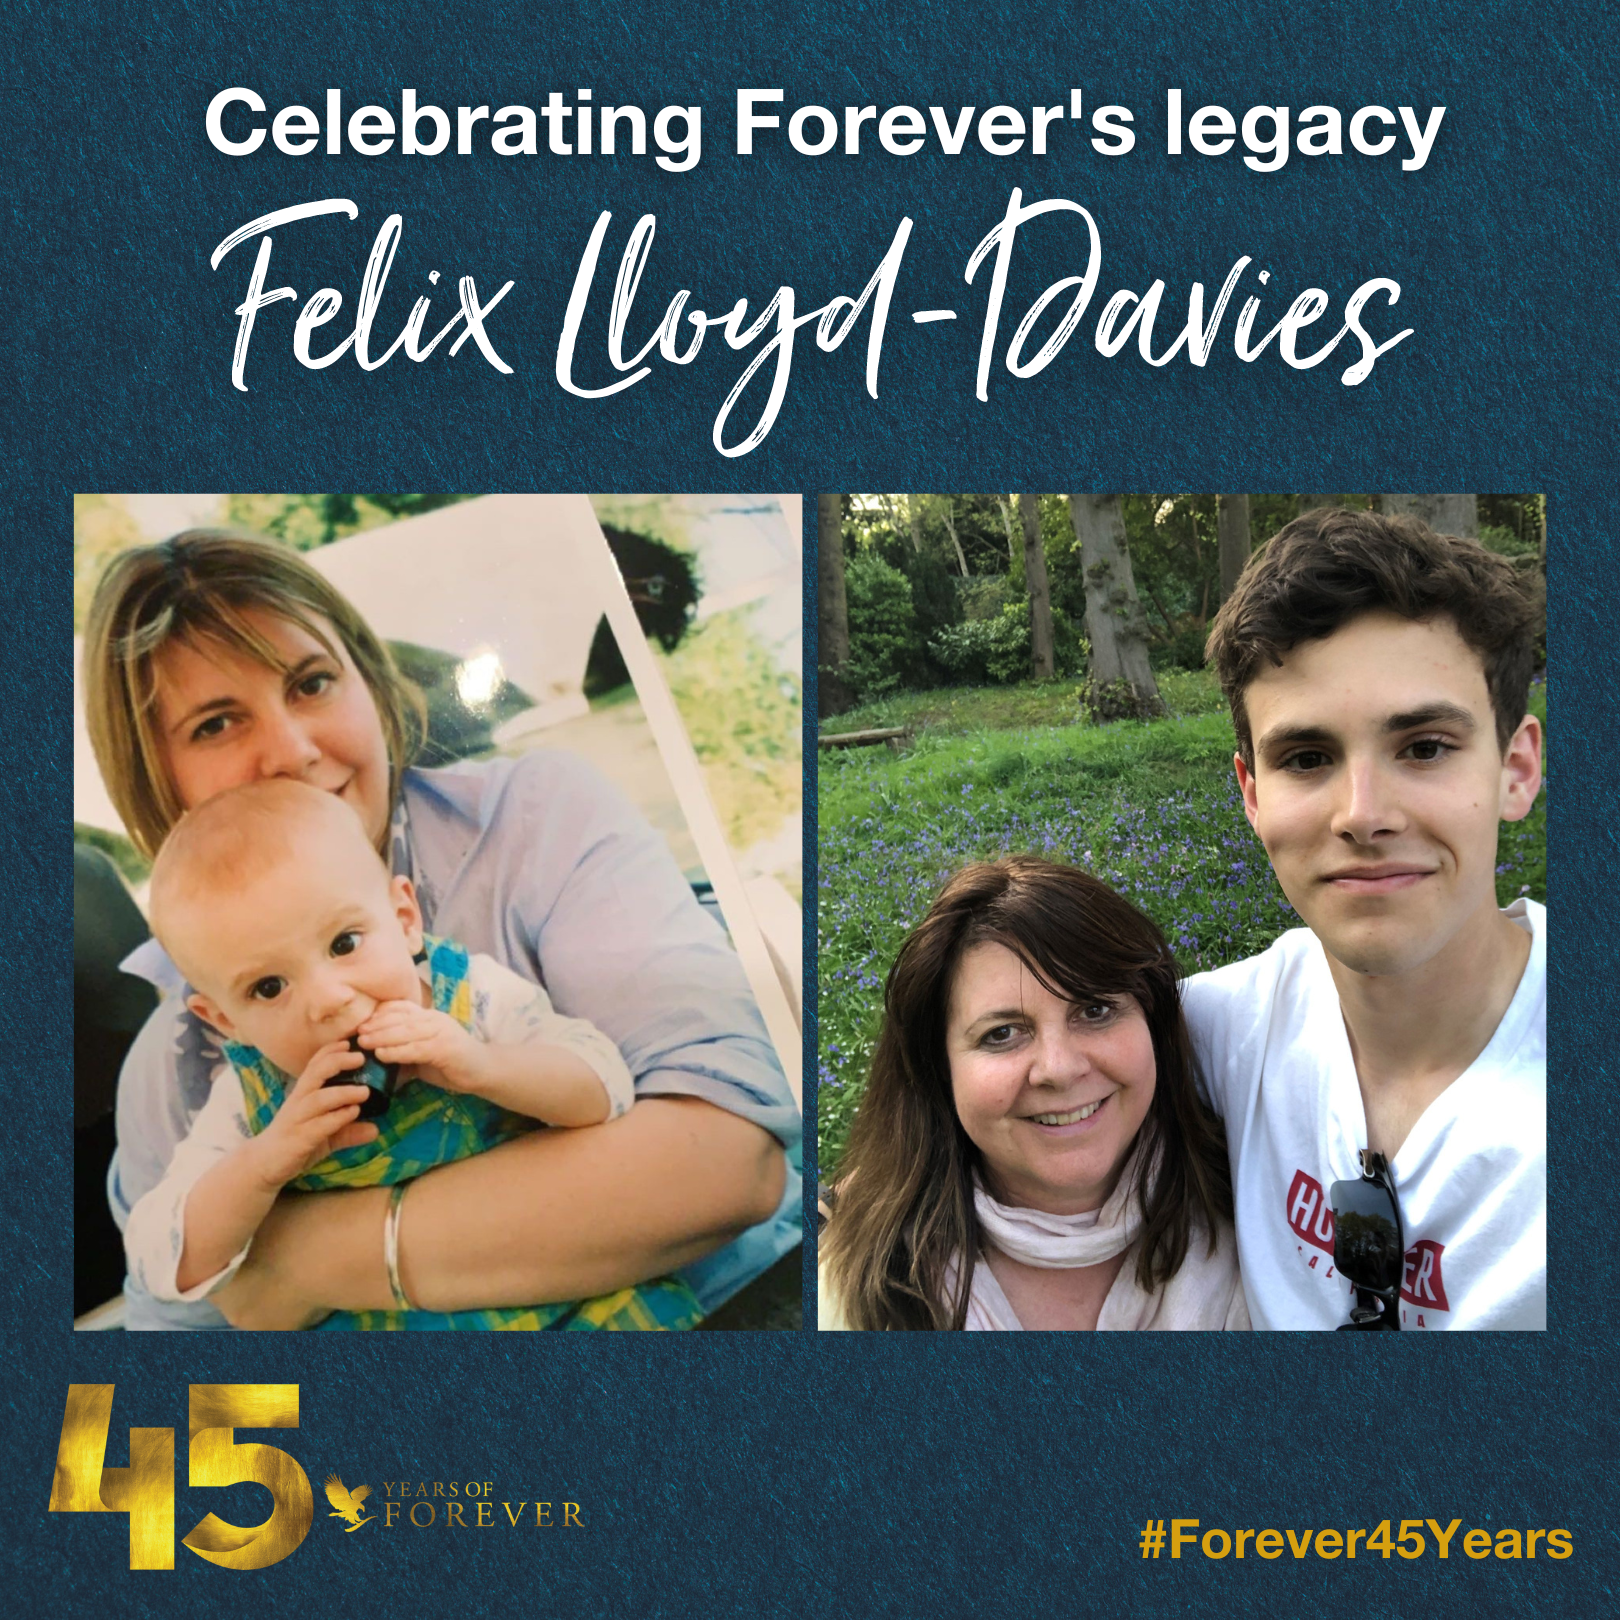 Felix Lloyd-Davies was born in 2000 and has been a part of Forever almost his entire life. His mum, Deborah Lloyd, previously worked in Management Consultancy and joined Forever in 1993. 

